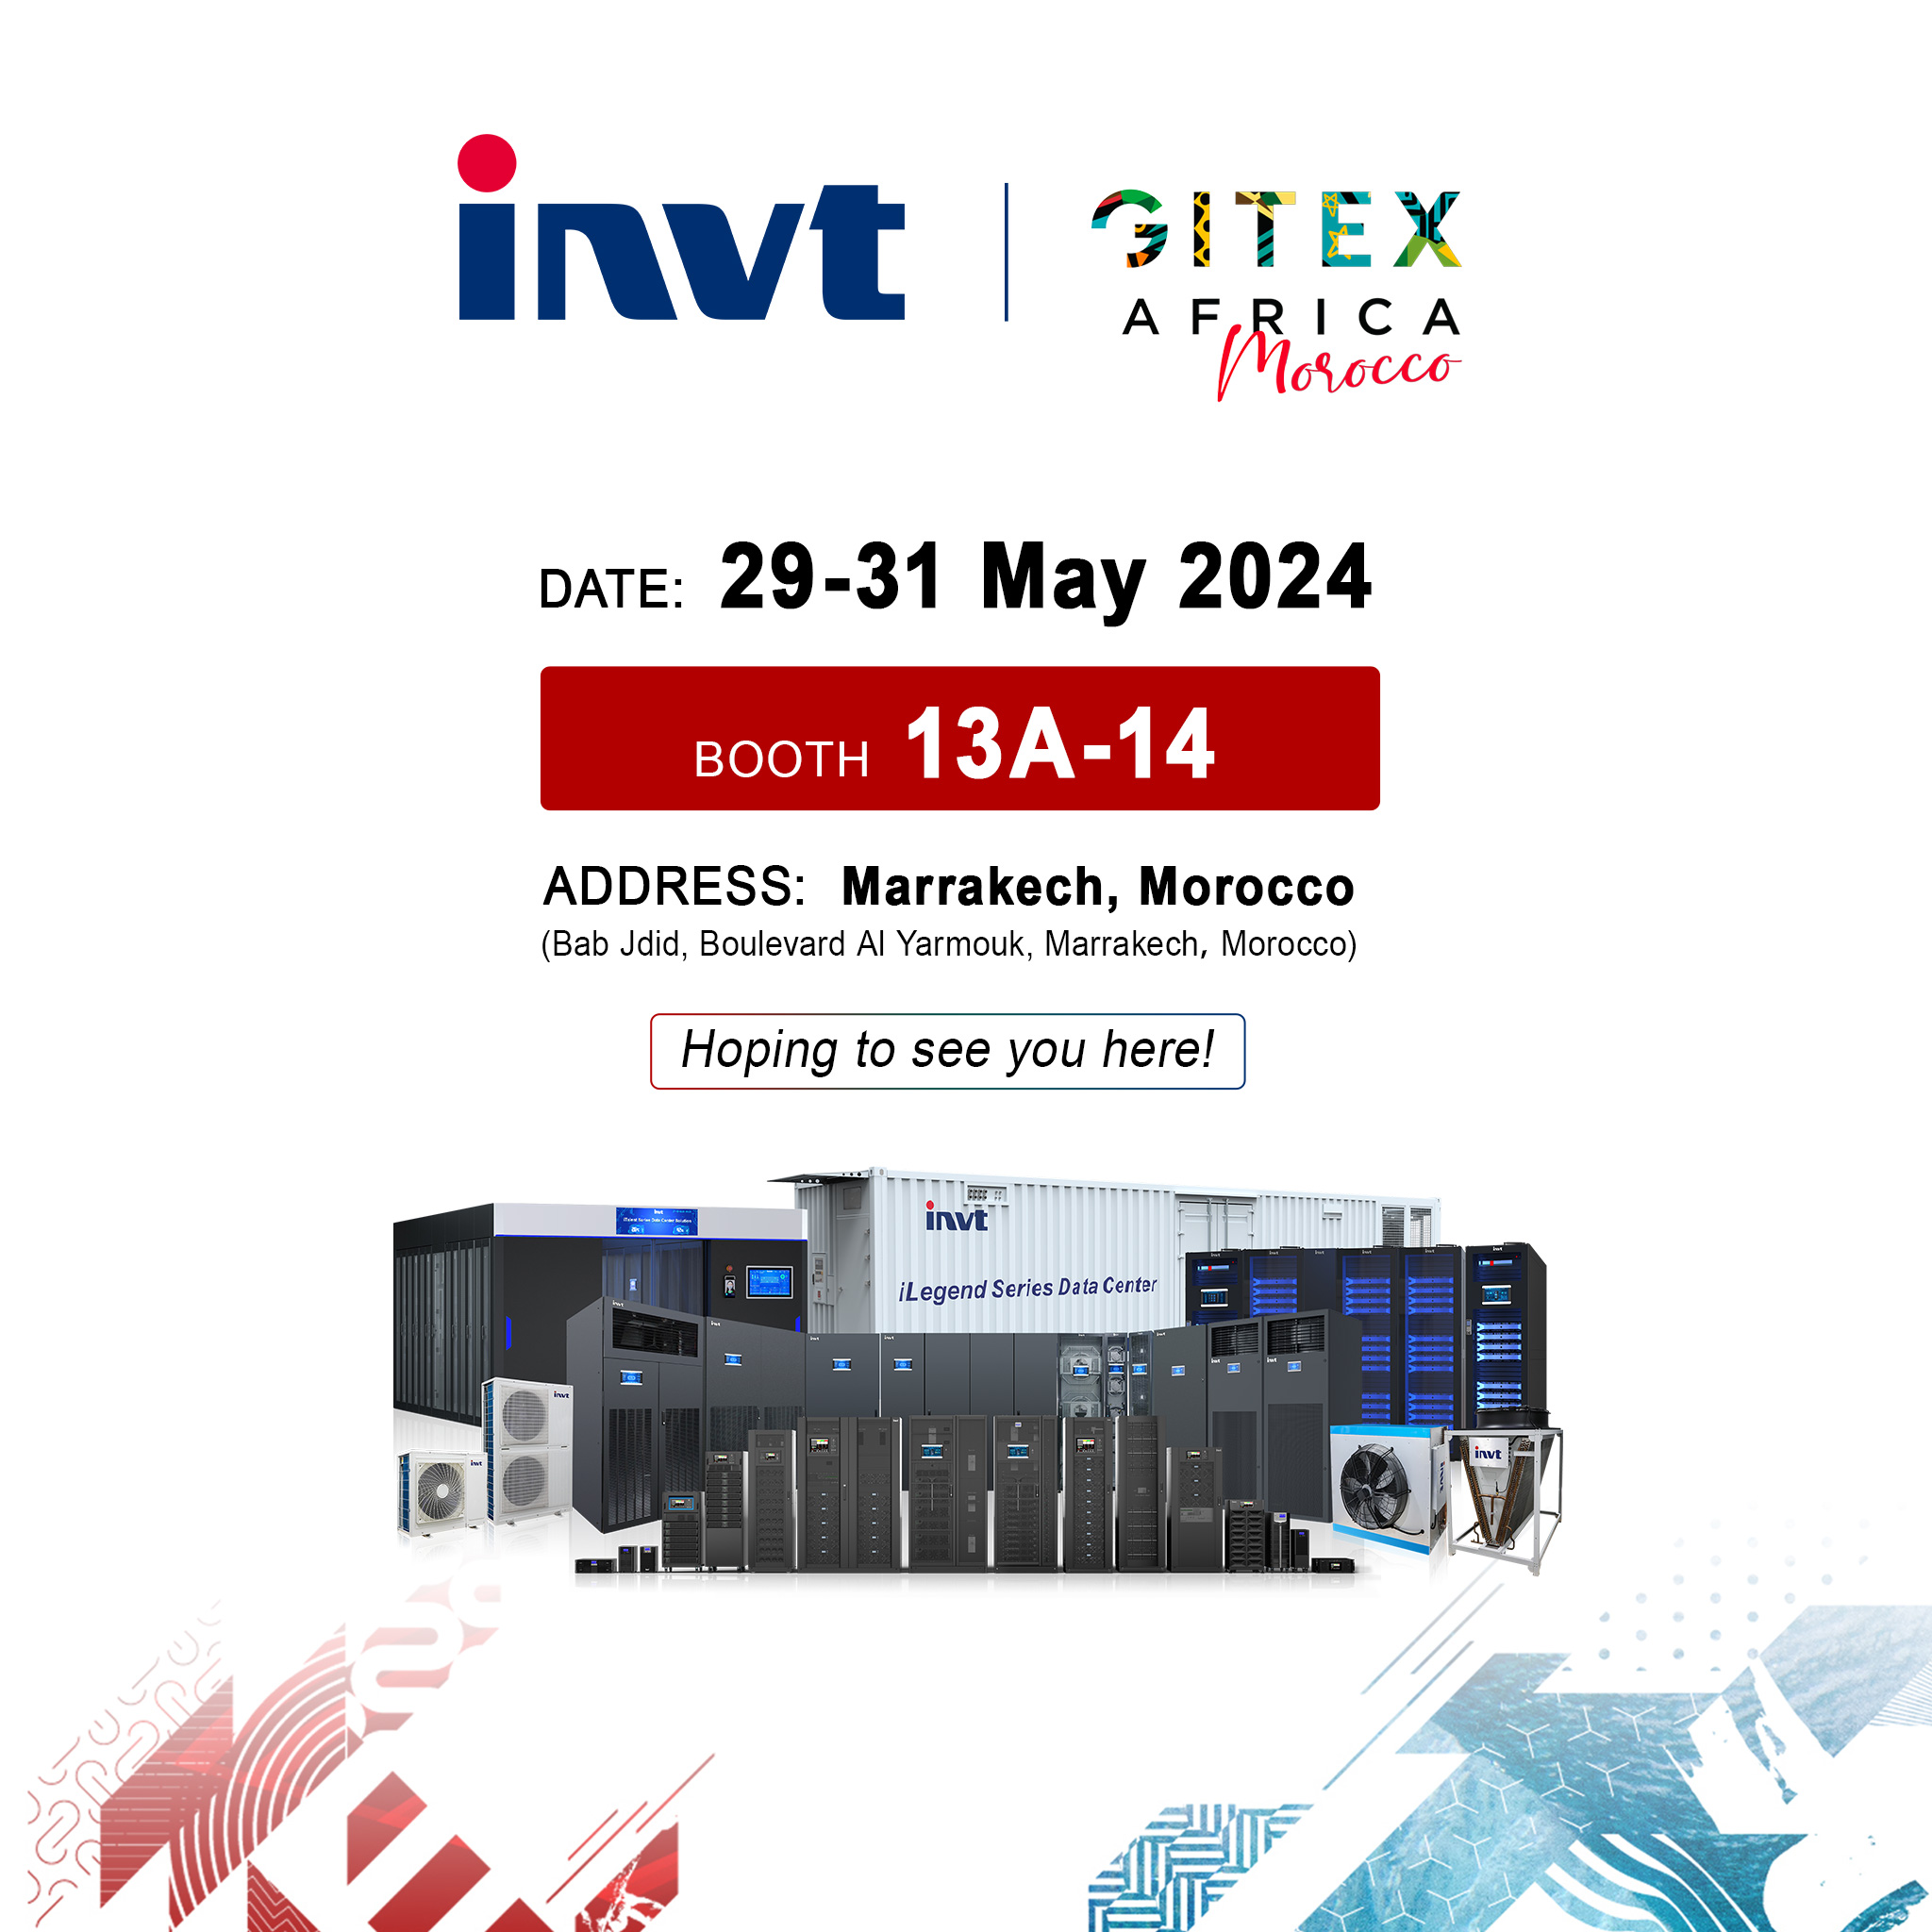 INVT hopes to see you at GITEX AFRICA 2024!